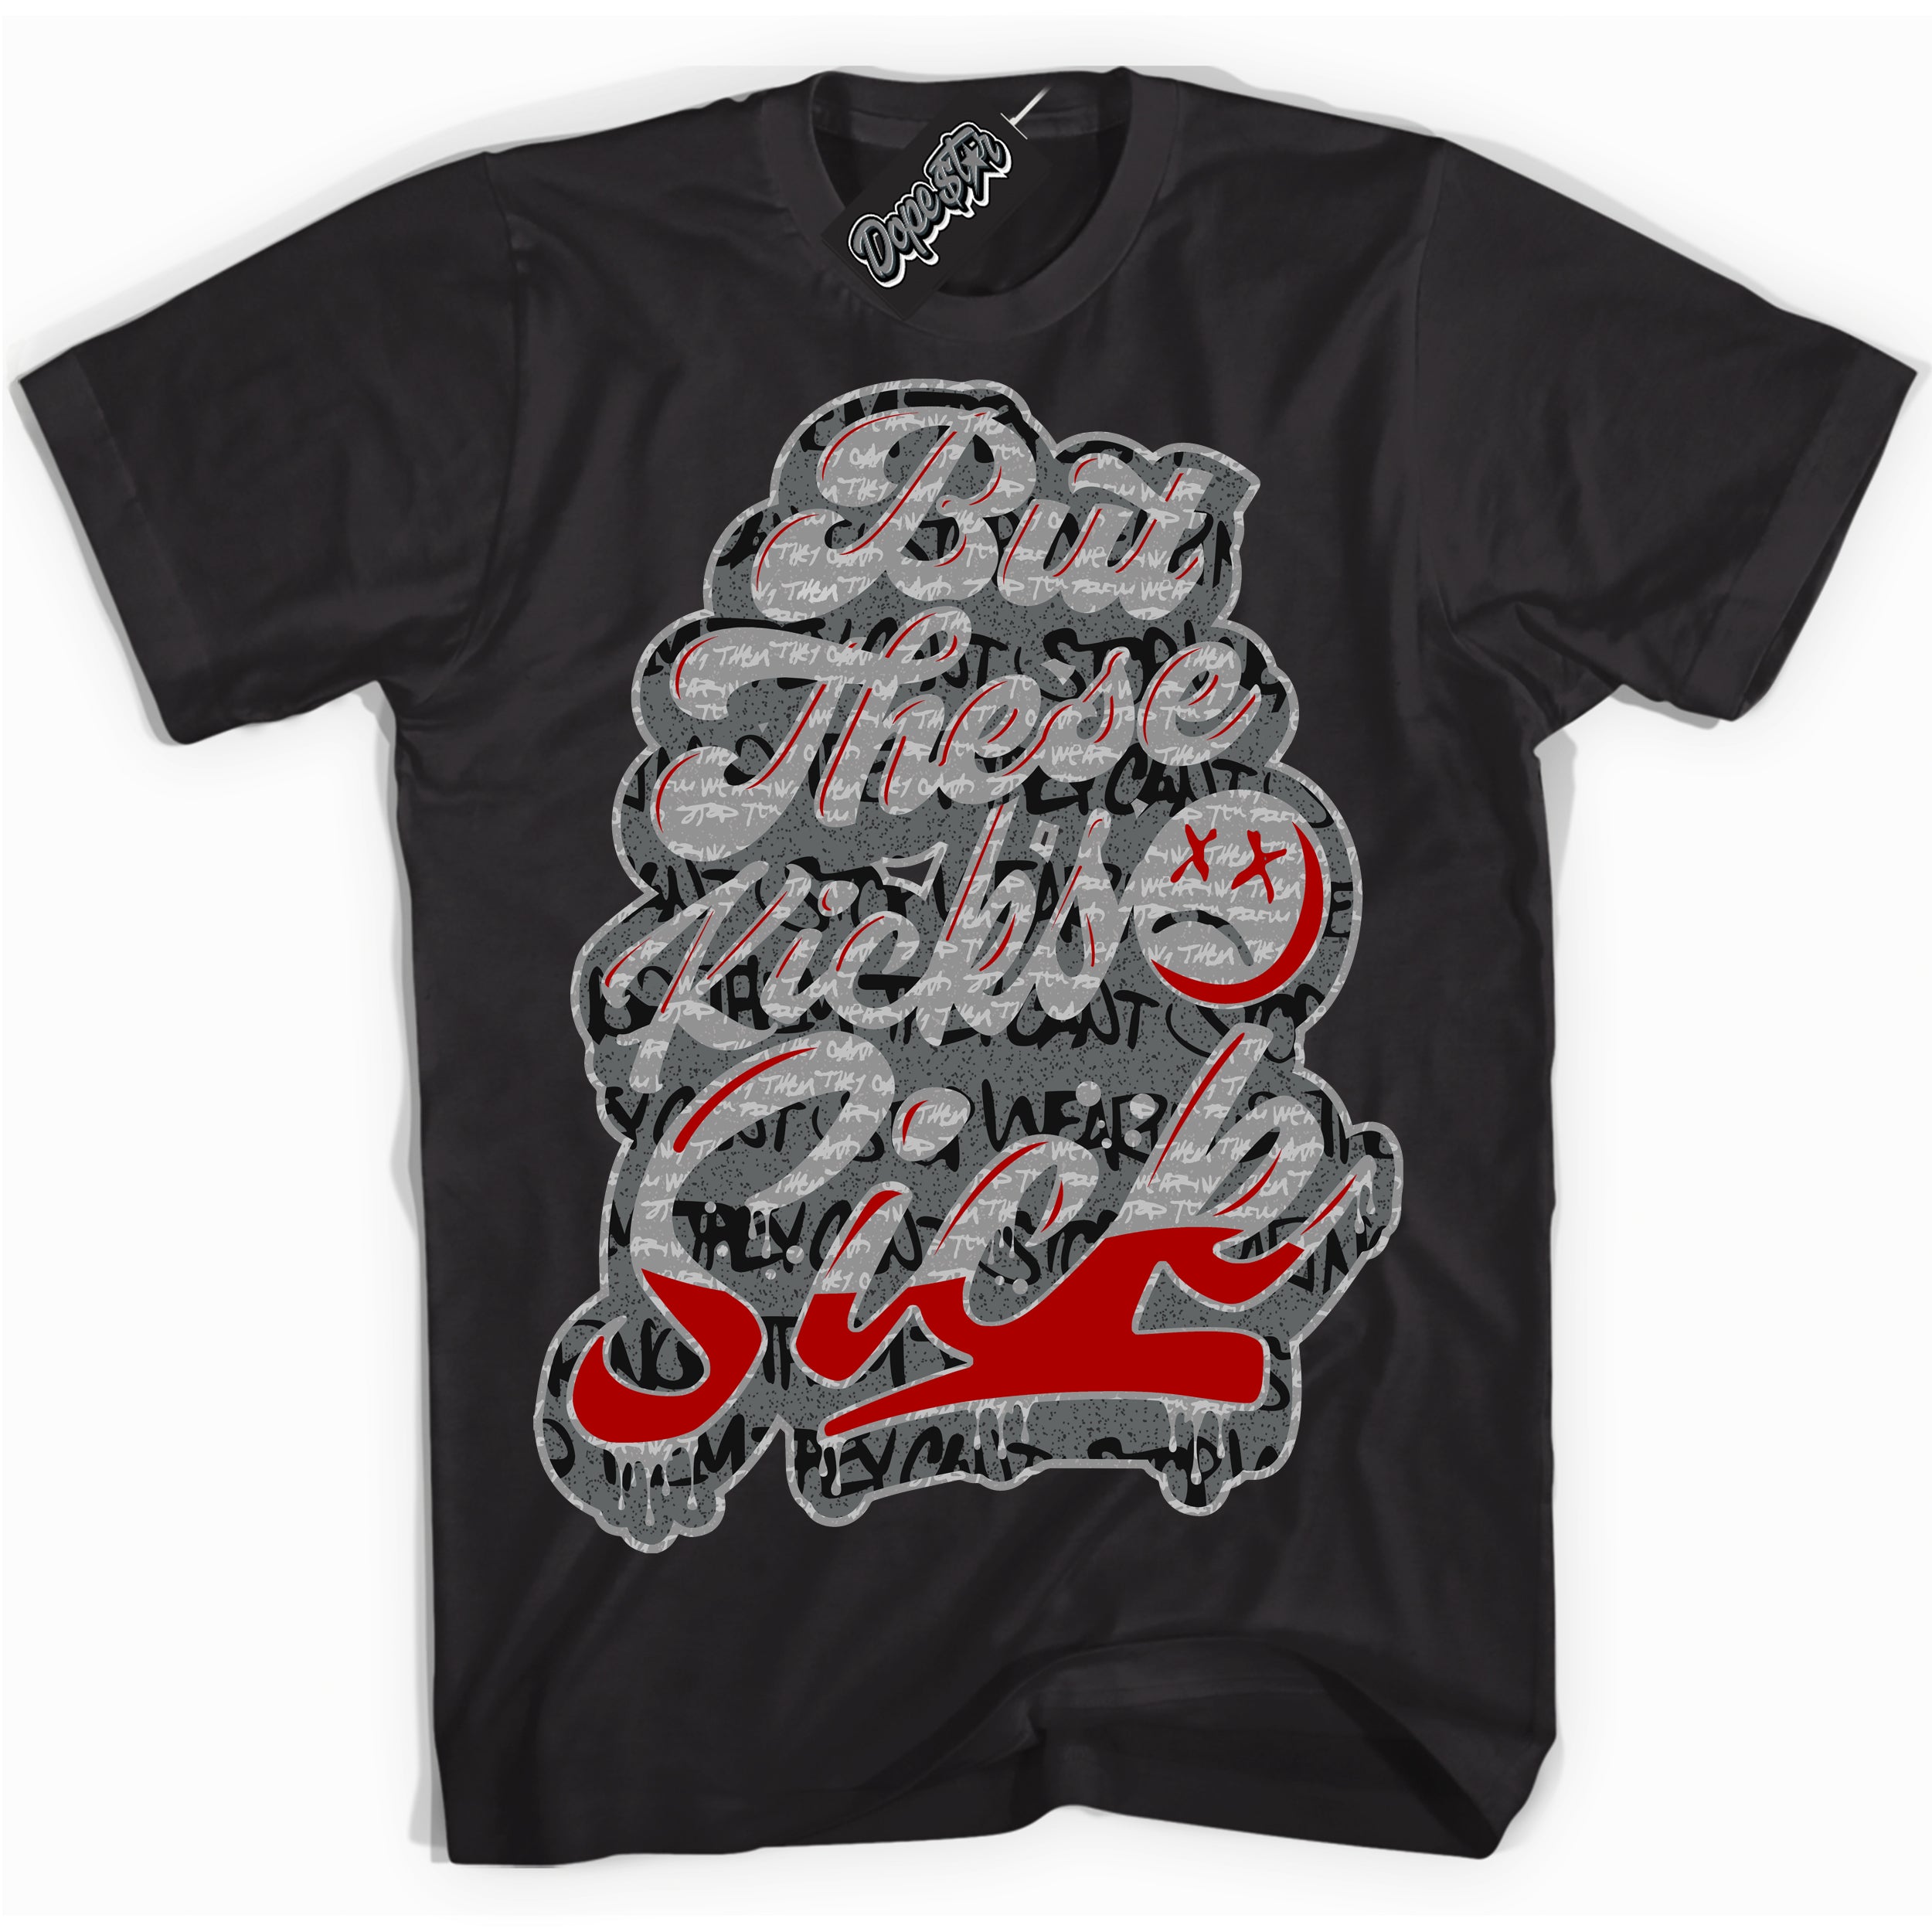 Cool Black Shirt with “ Kick Sick ” design that perfectly matches Rebellionaire 1s Sneakers.